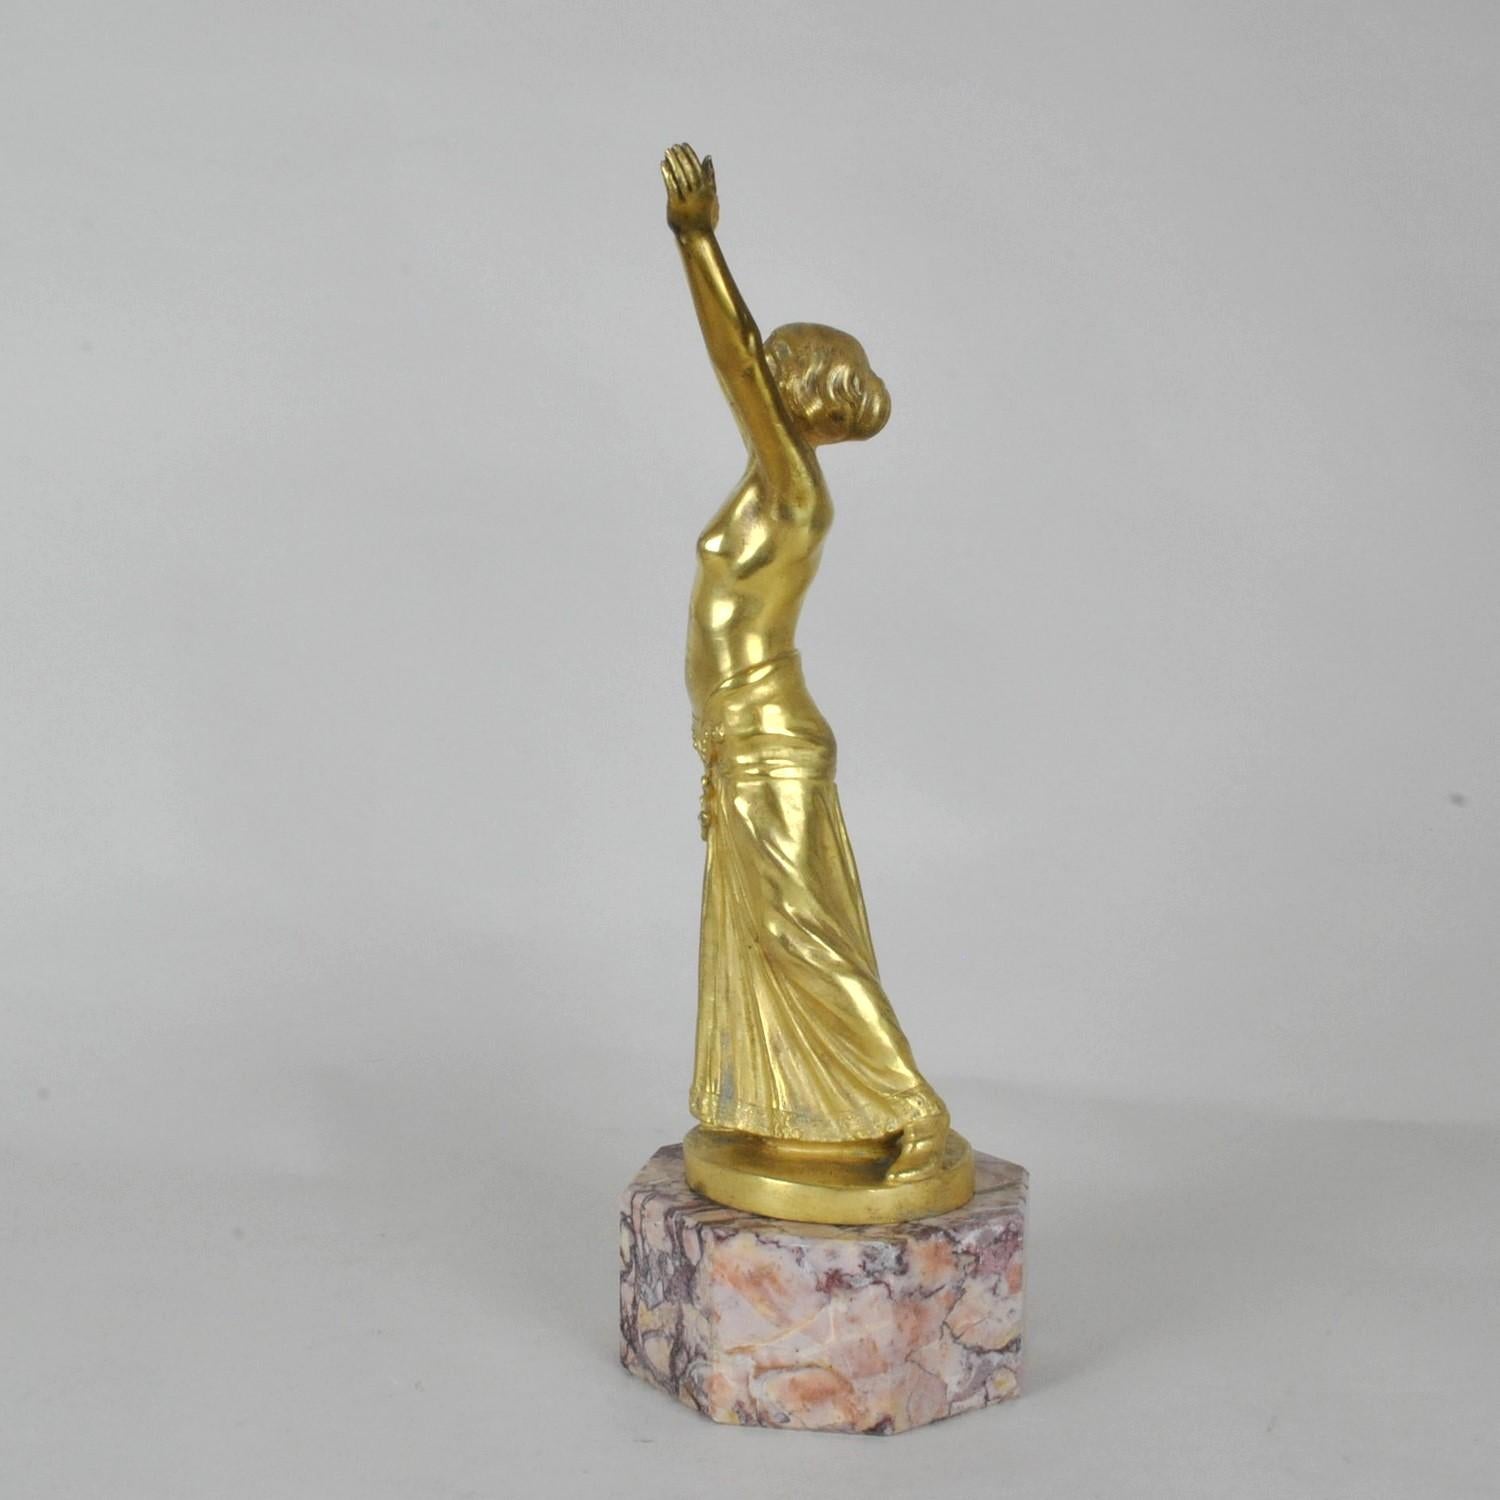 Art Nouveau Muller, Priestess, Gilt Bronze Signed, Late 19th Century Early 20th Century For Sale